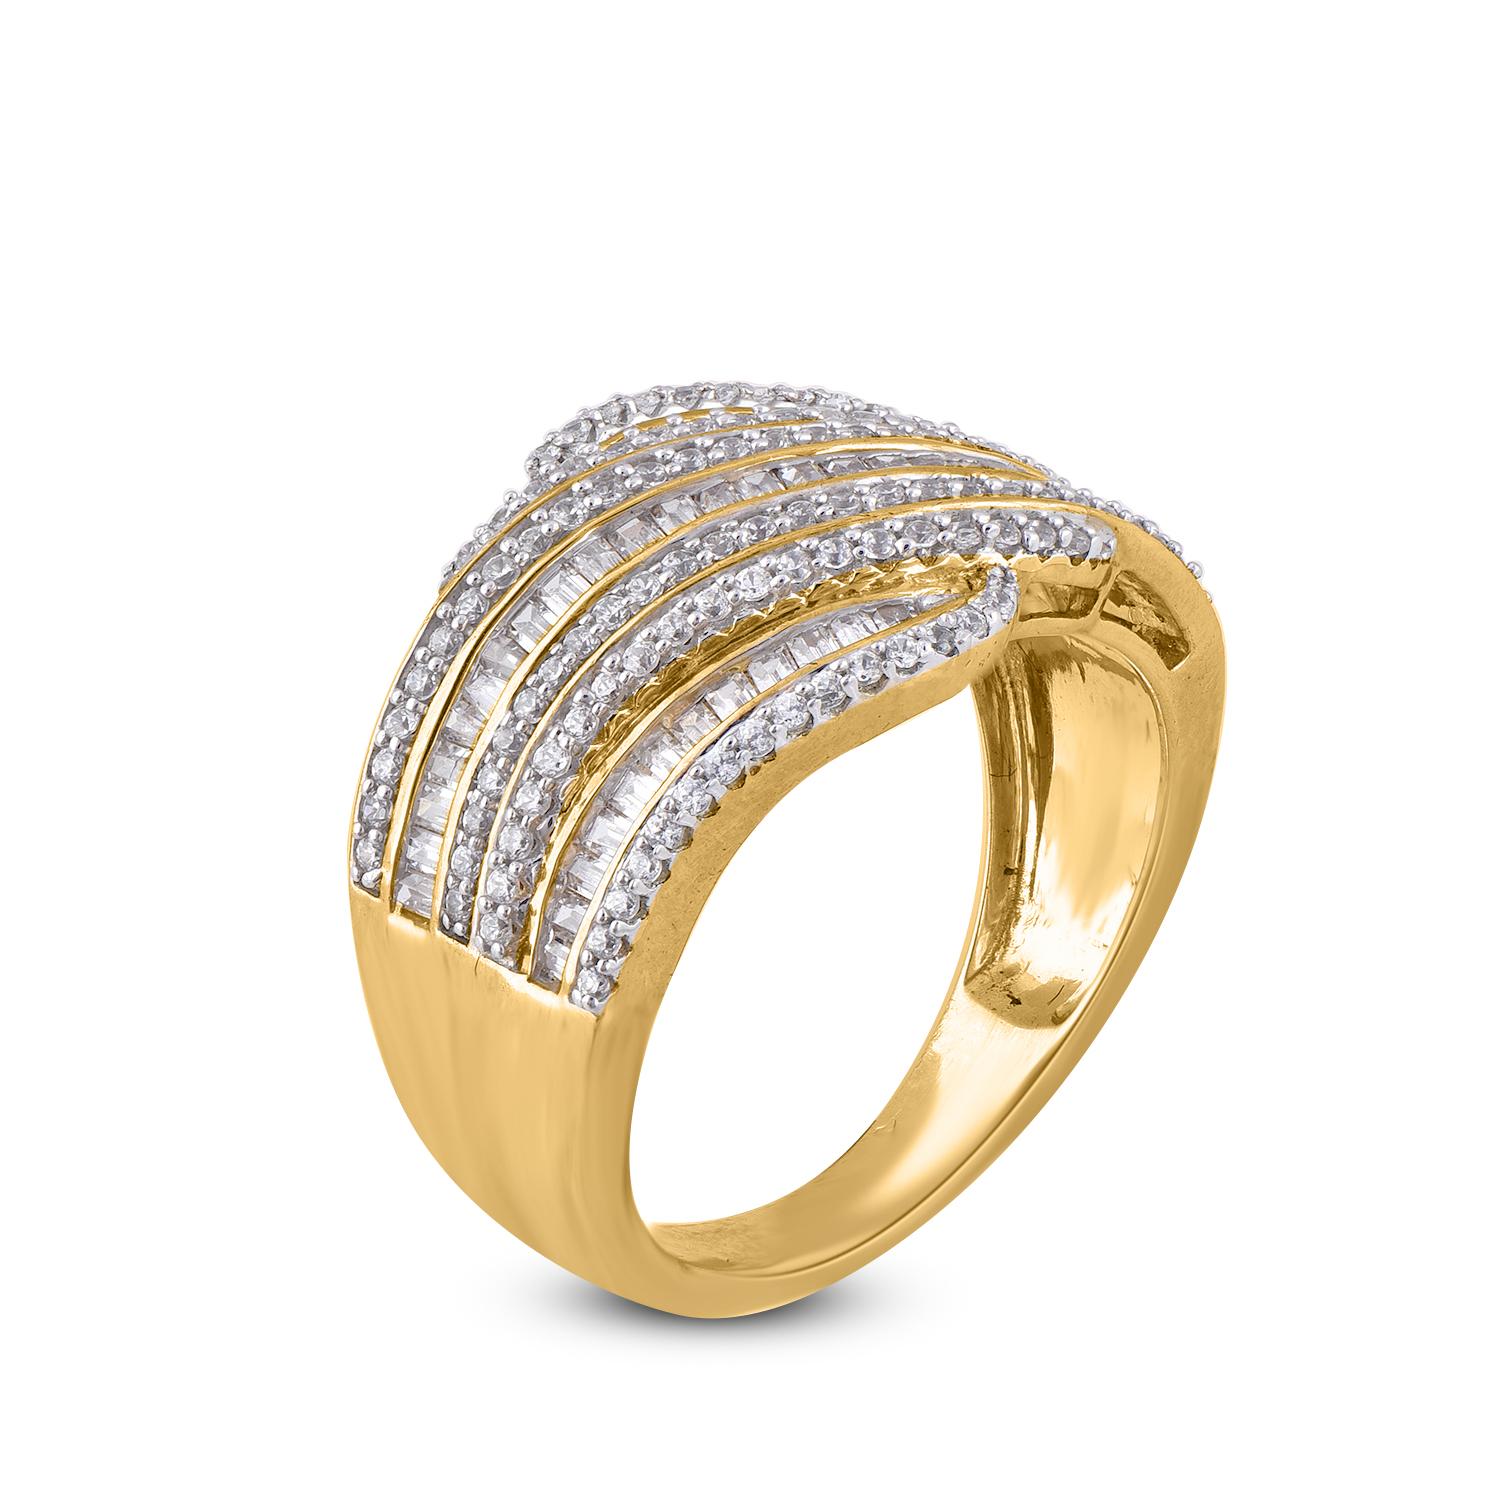 A fusion of diamonds and gold, made in 14 karat yellow gold. A multi-row design accentuated with 126 round diamonds and 57 baguette cut diamond set in prong and channel setting. The diamonds are graded H-I color I2 clarity.
